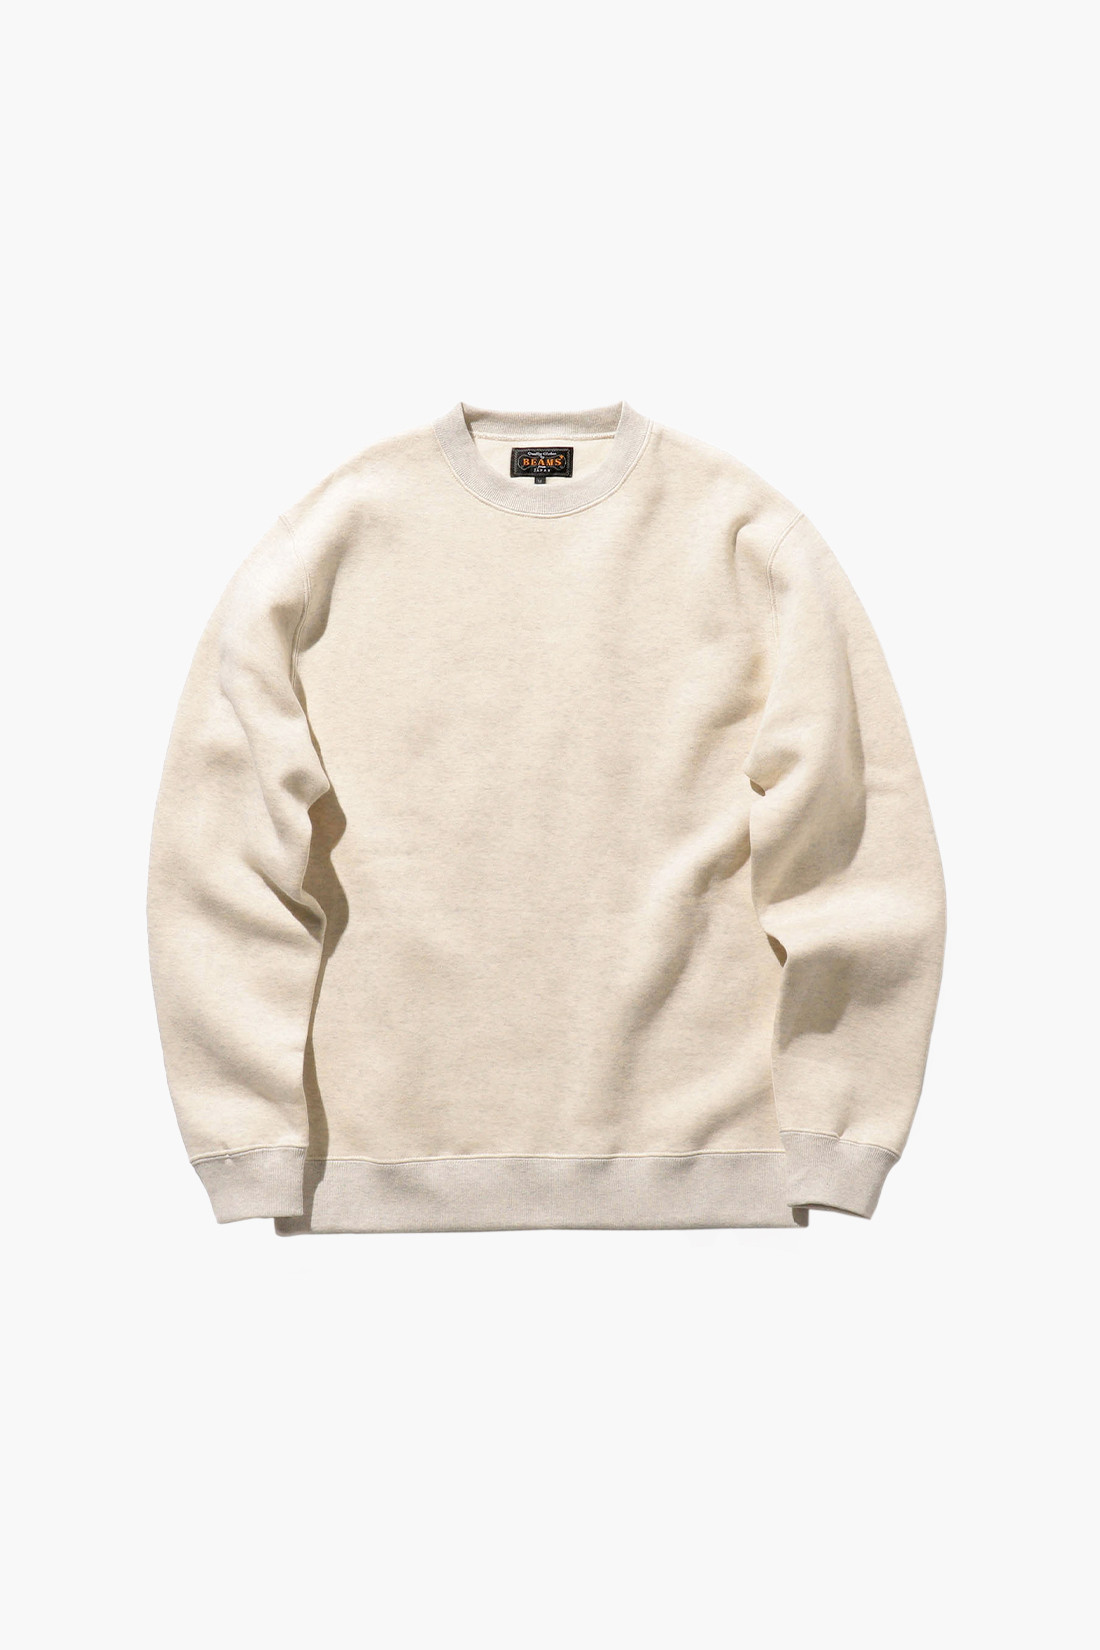 BEAMS PLUS - FW21 Collection